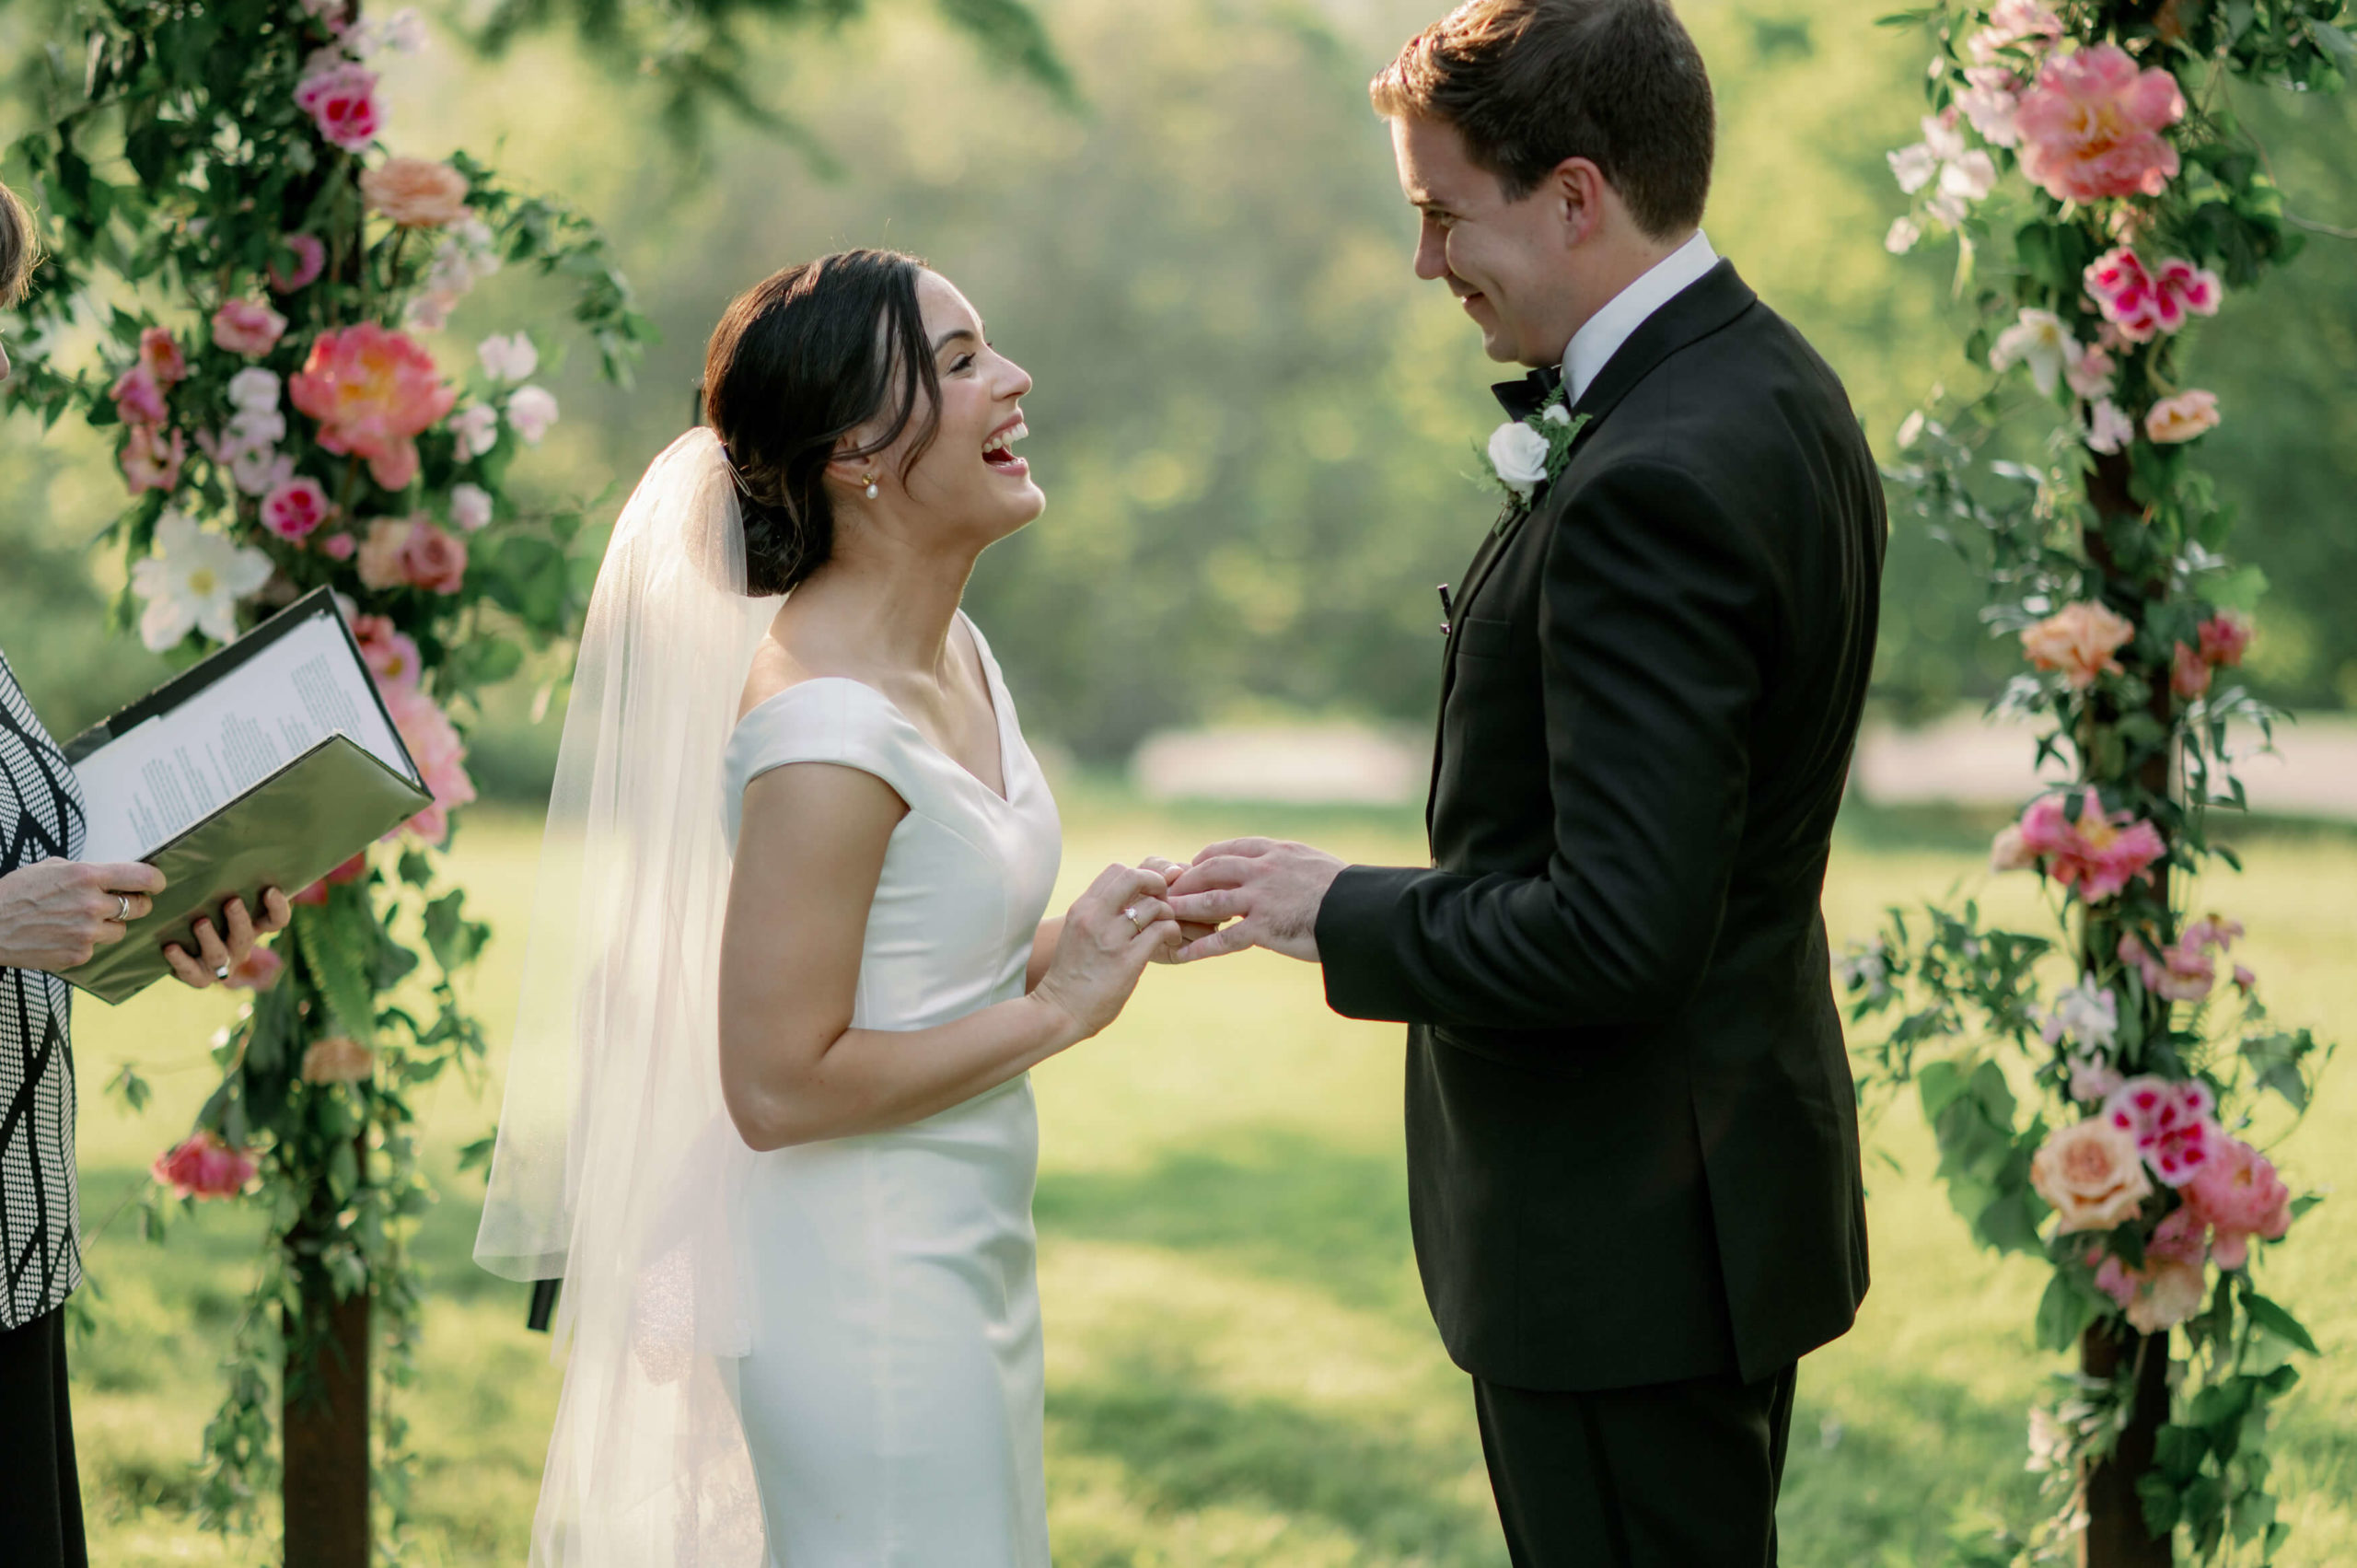 Editorial wedding image of the bride and groom happily exchanging vows. Image by Jenny Fu Studio